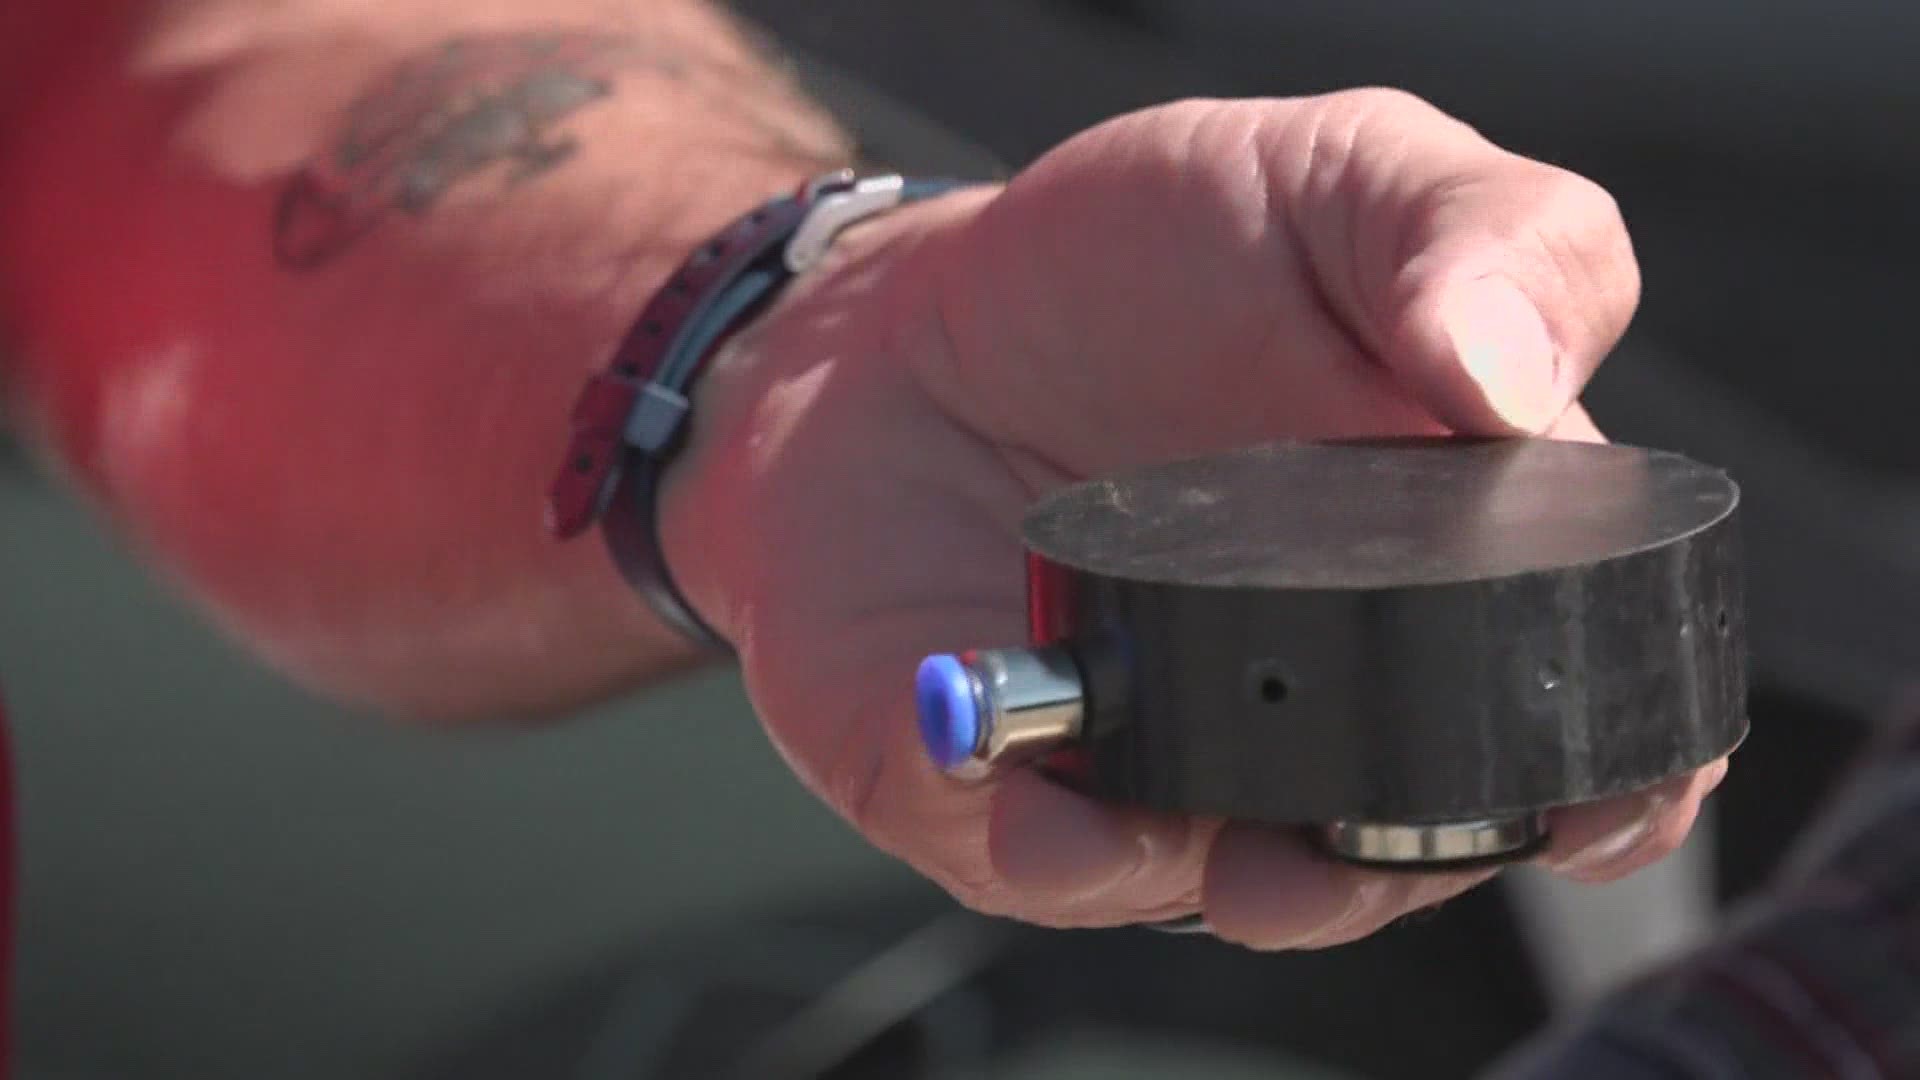 A former police officer from Maine has created F3 Defense, a non-lethal device he says can help to protect people while they're in their cars.